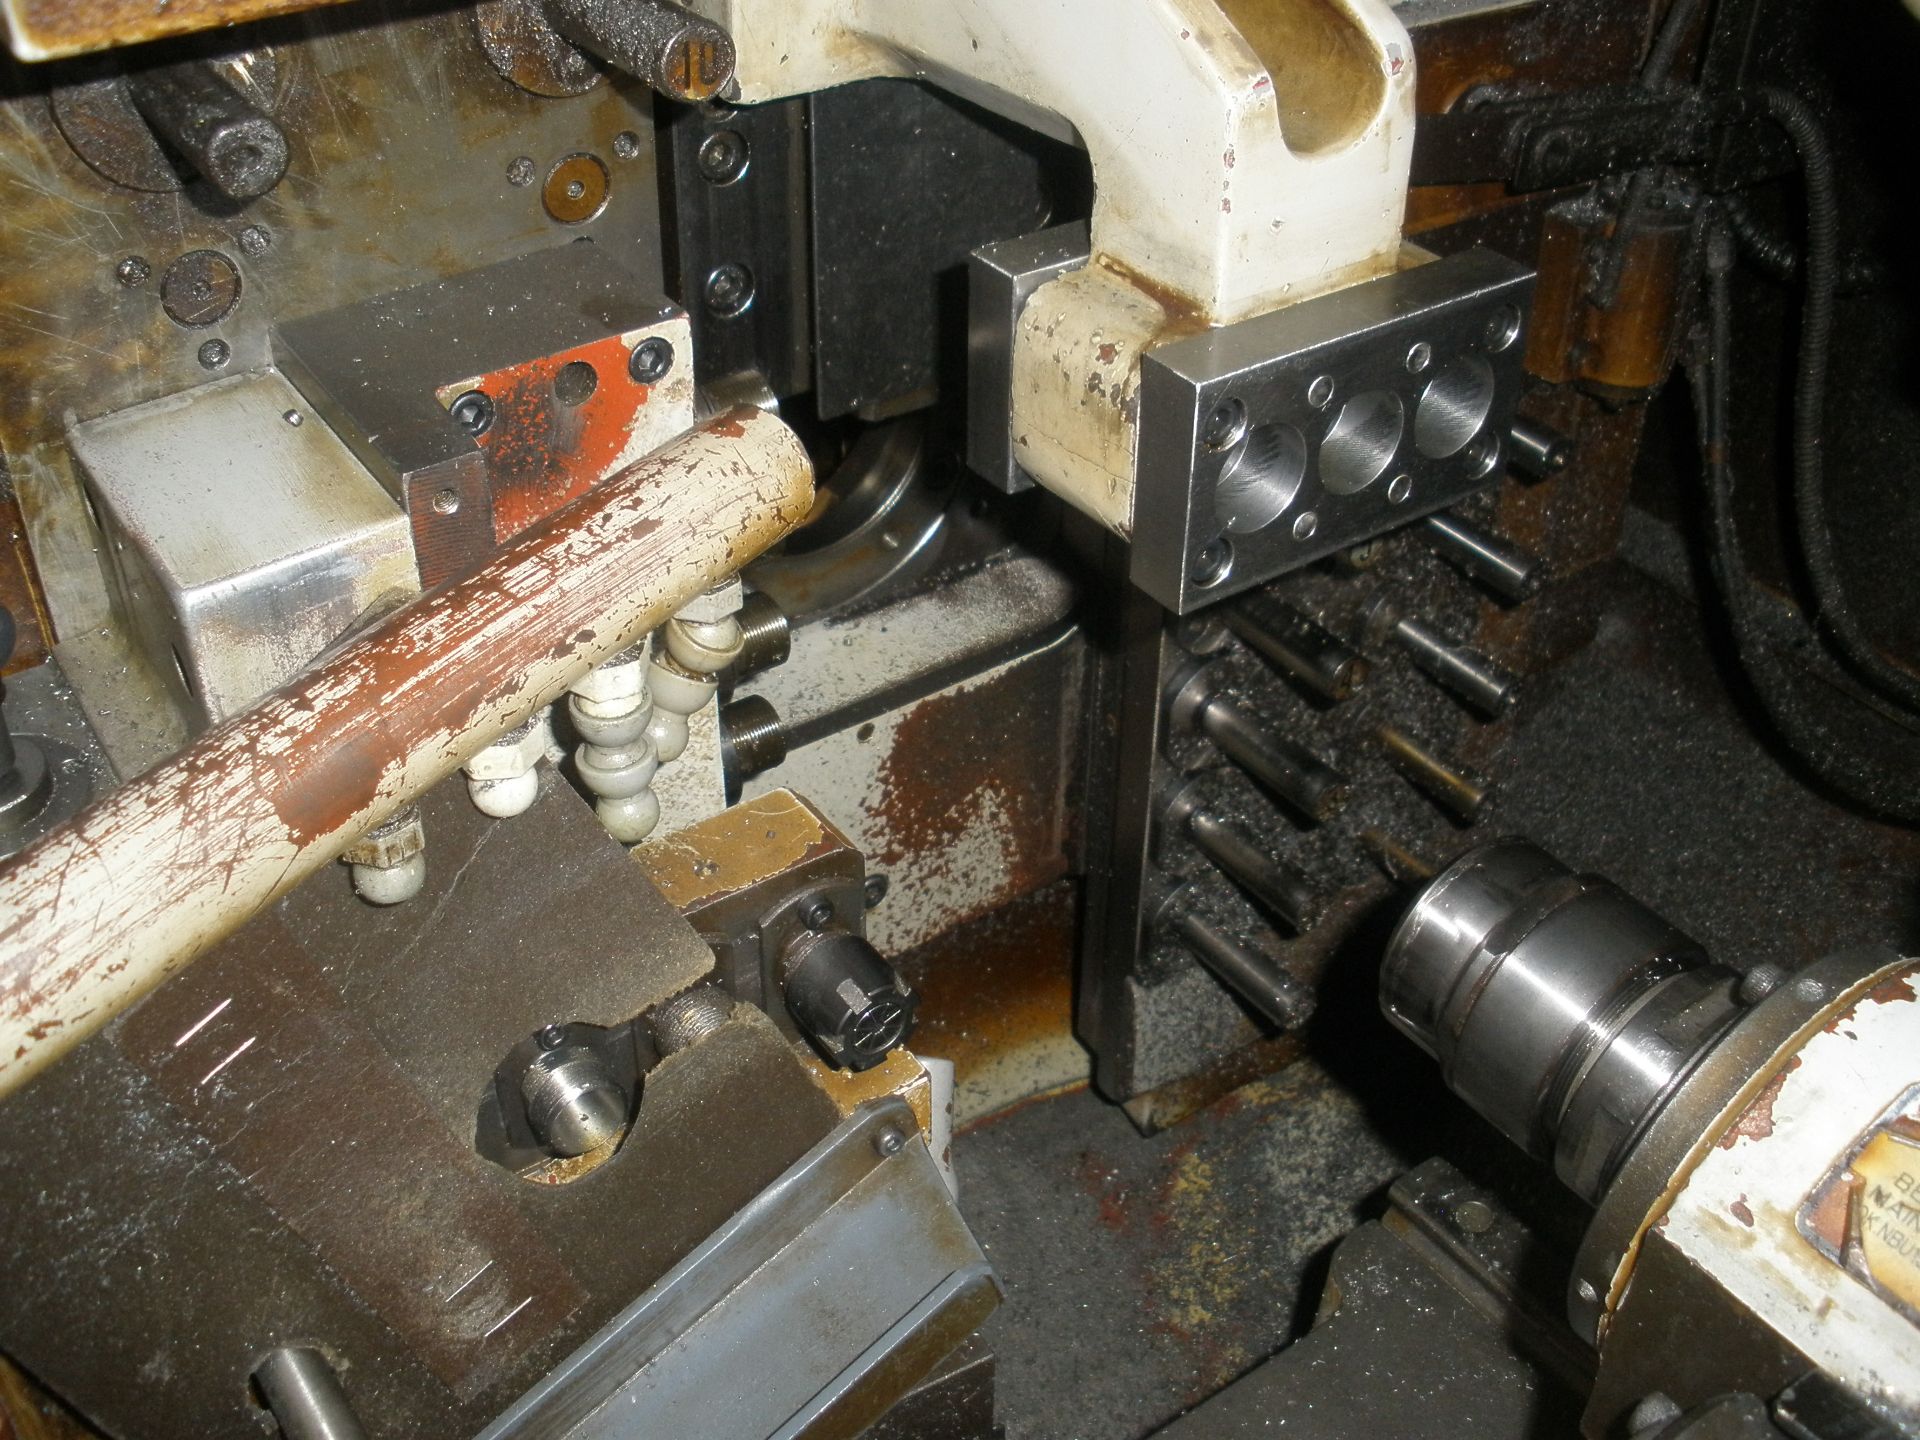 2003 Nomura NN20B5 CNC Swiss Lathe, Sub Spindle Live Tools With Video - Image 5 of 11